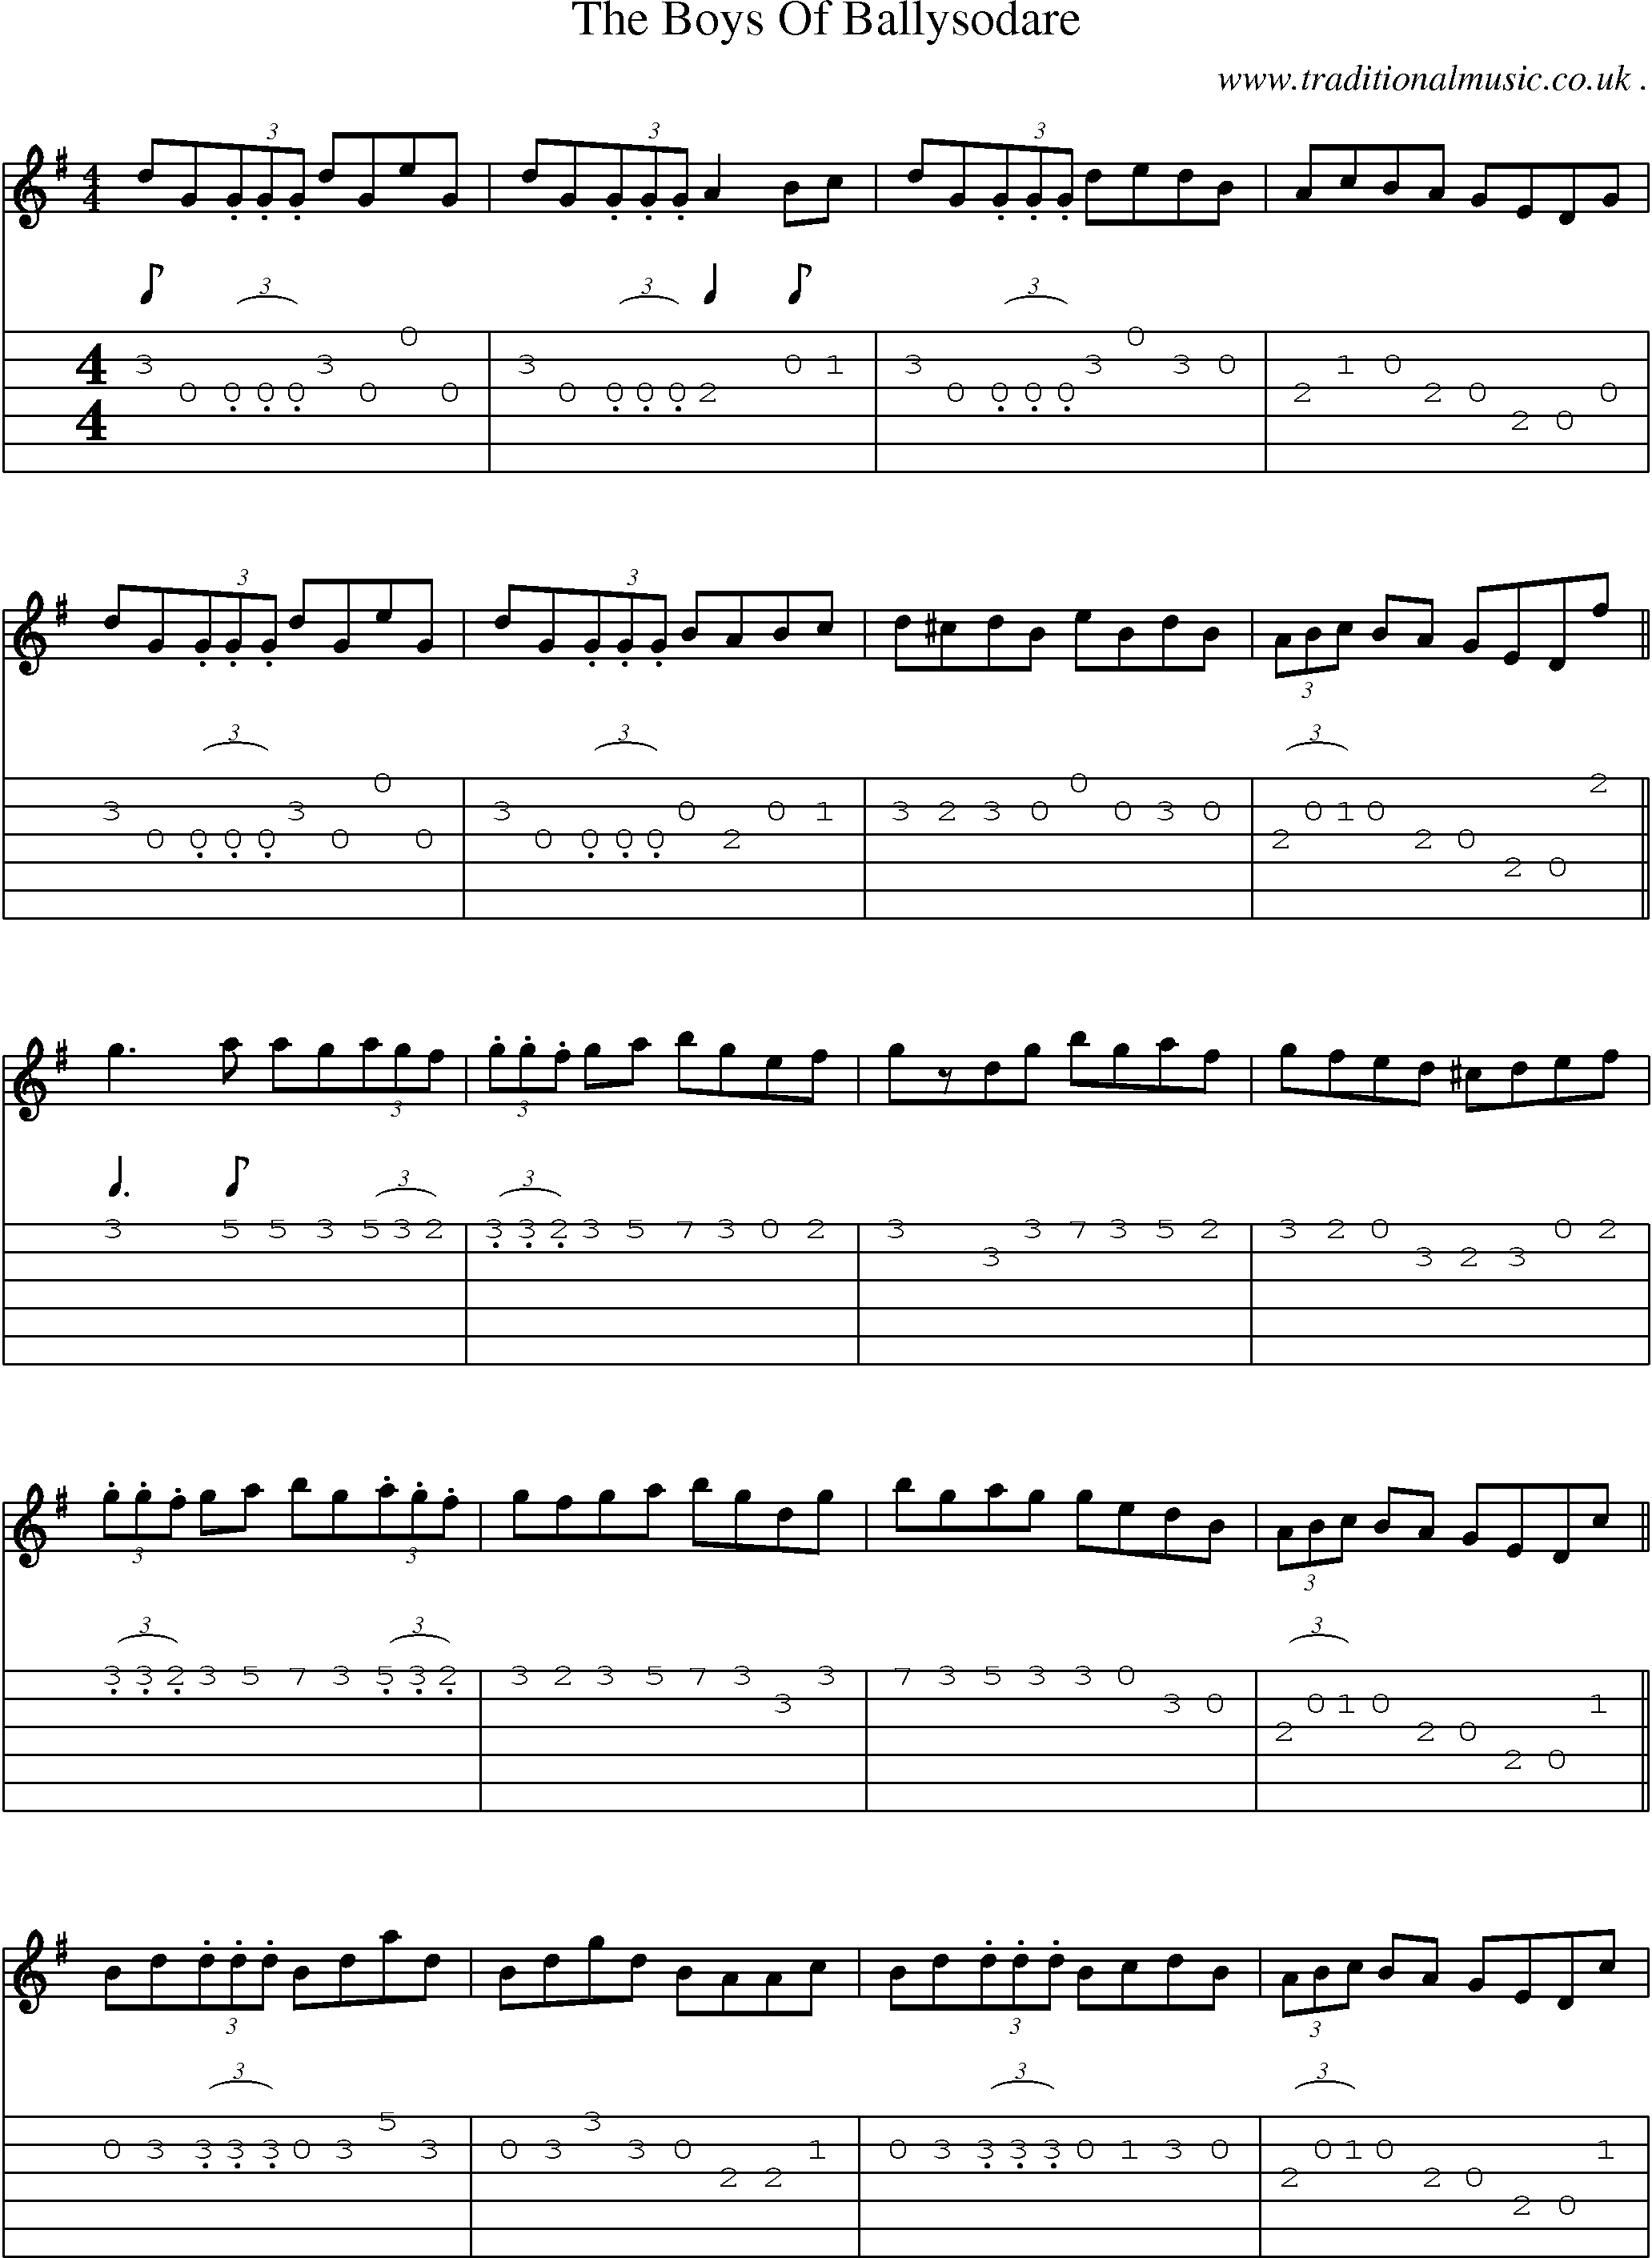 Sheet-Music and Guitar Tabs for The Boys Of Ballysodare